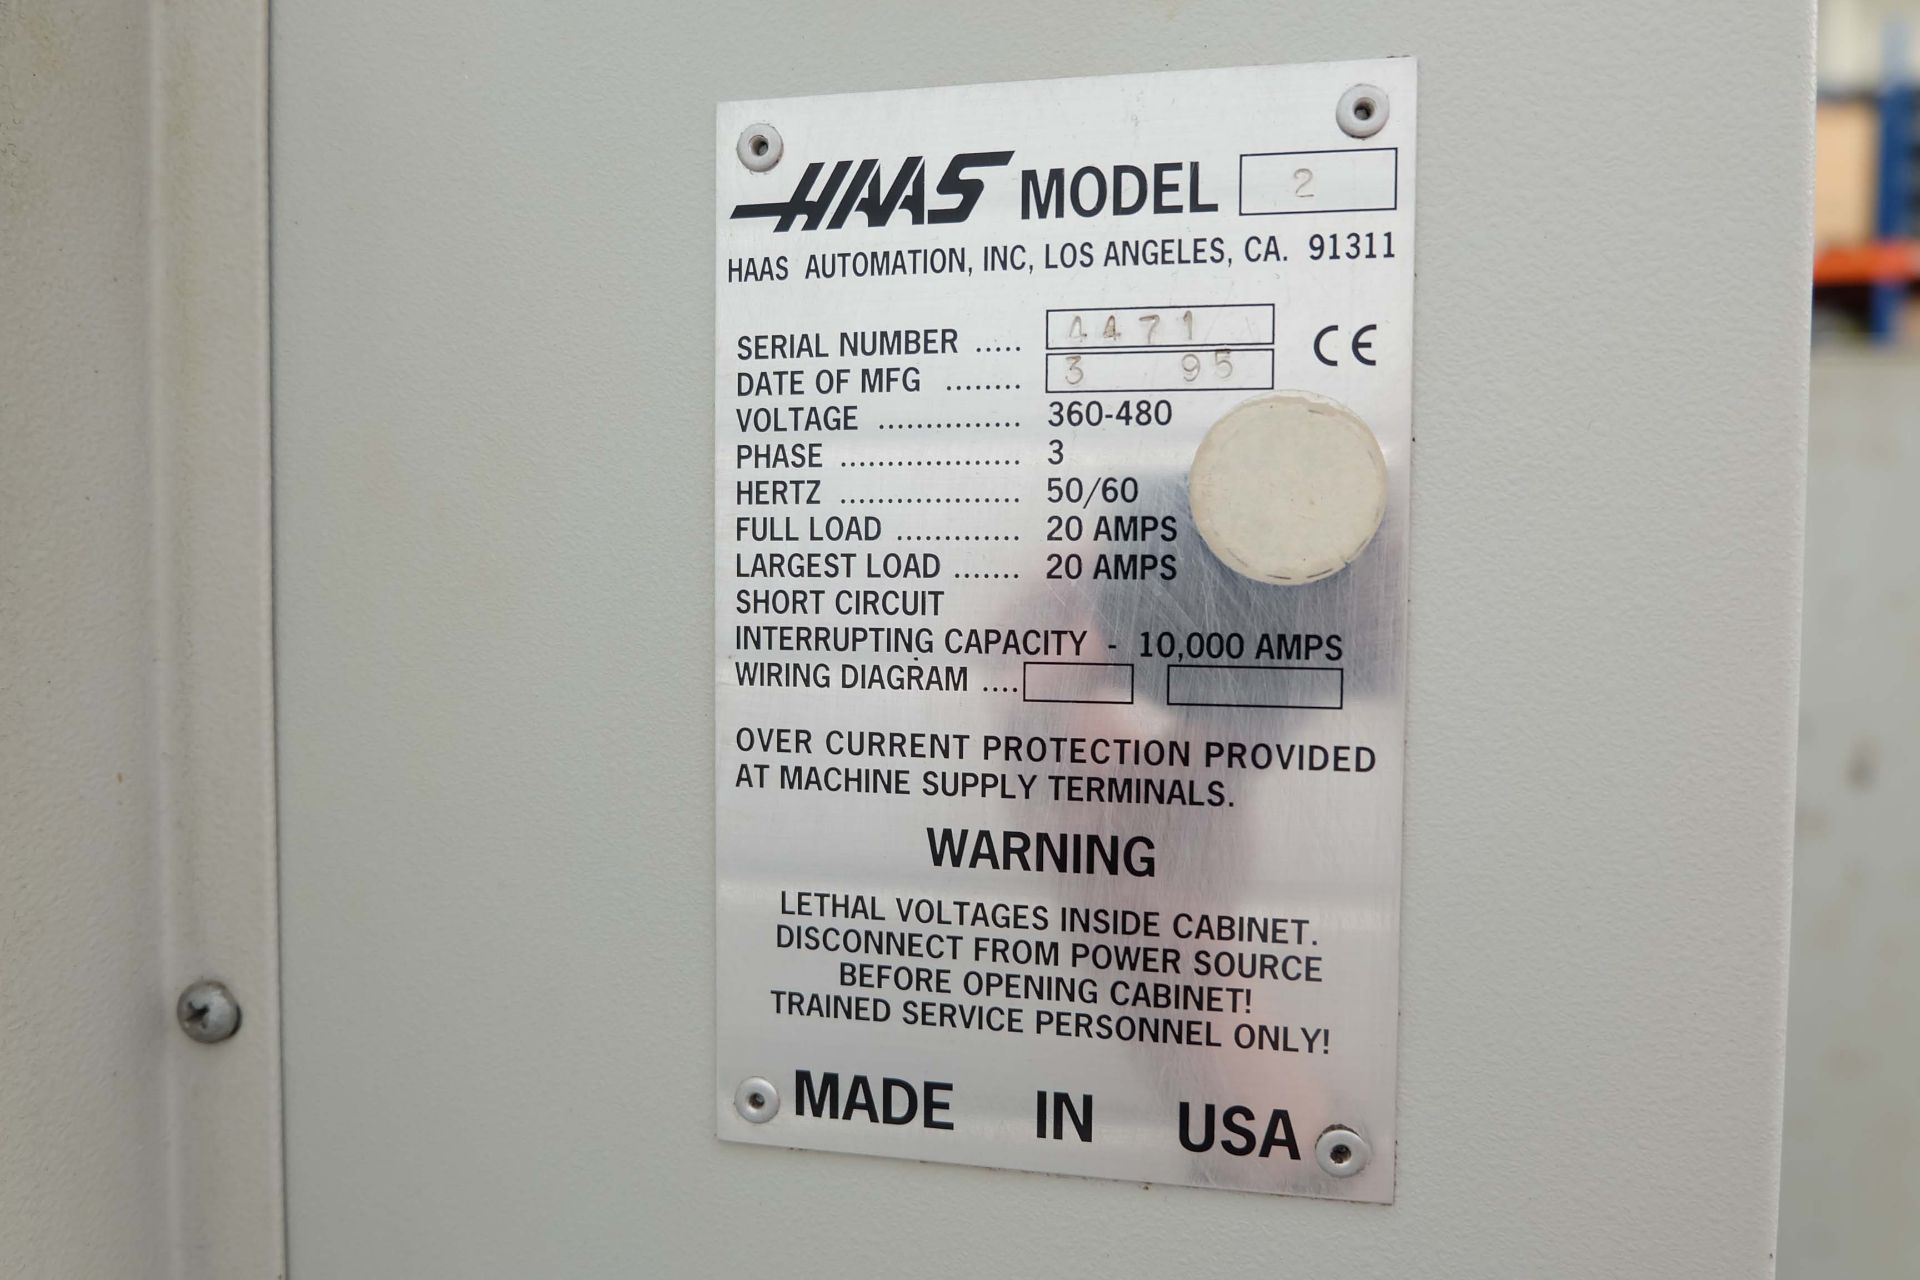 HAAS Model 2 Three Axis Vertical Maching Centre With 20 Station Auto Tool Changer. - Image 11 of 12